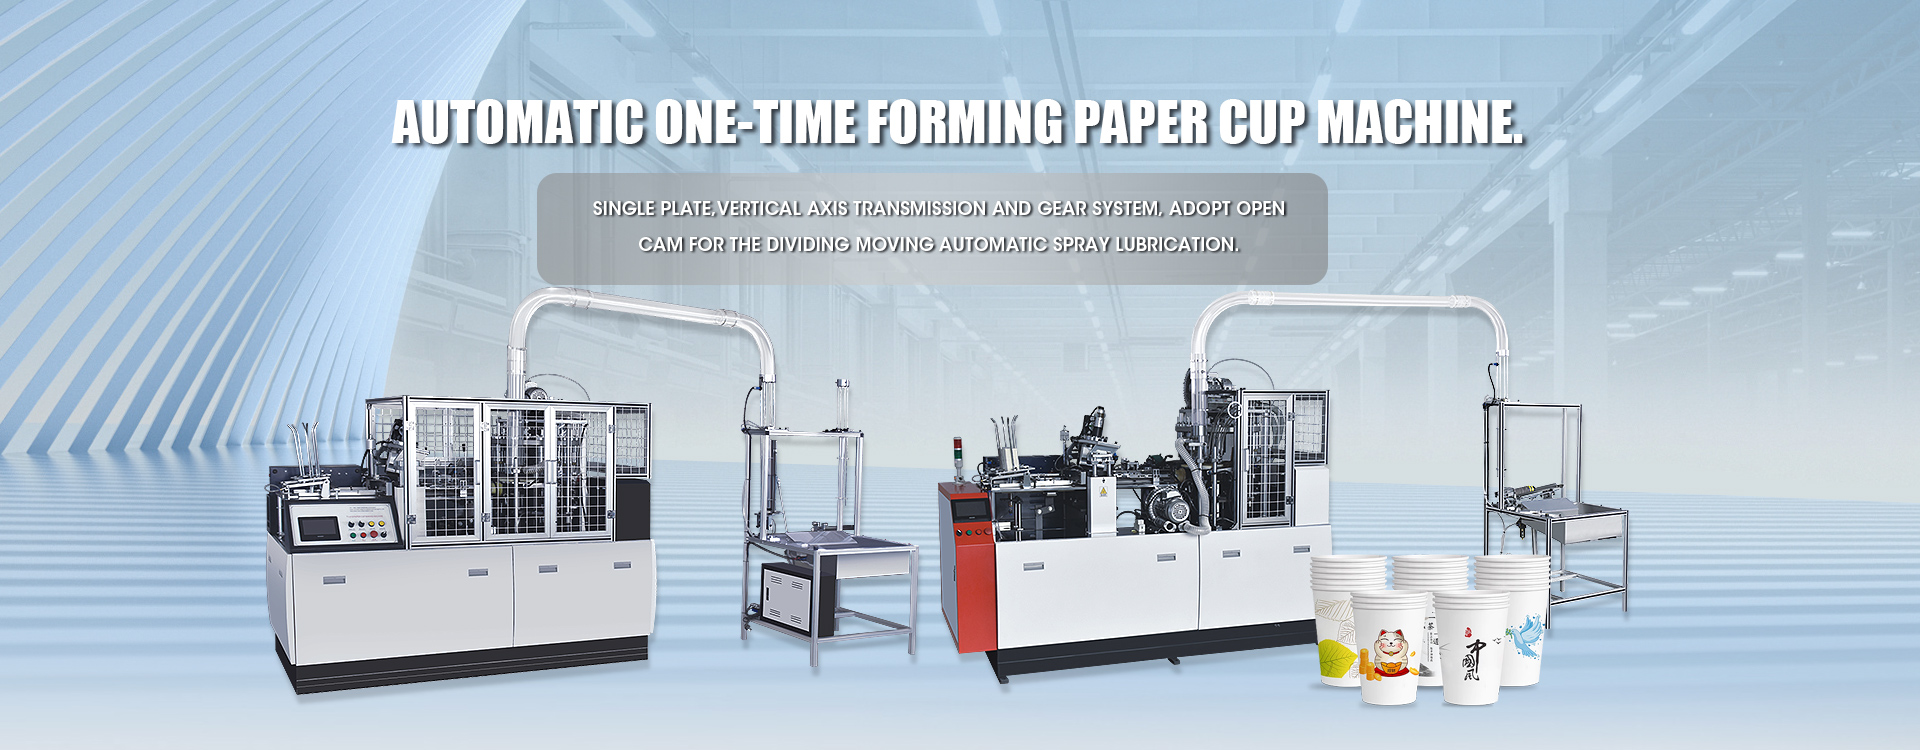 YAST-H100 Automatic one-time forming paper cup machine